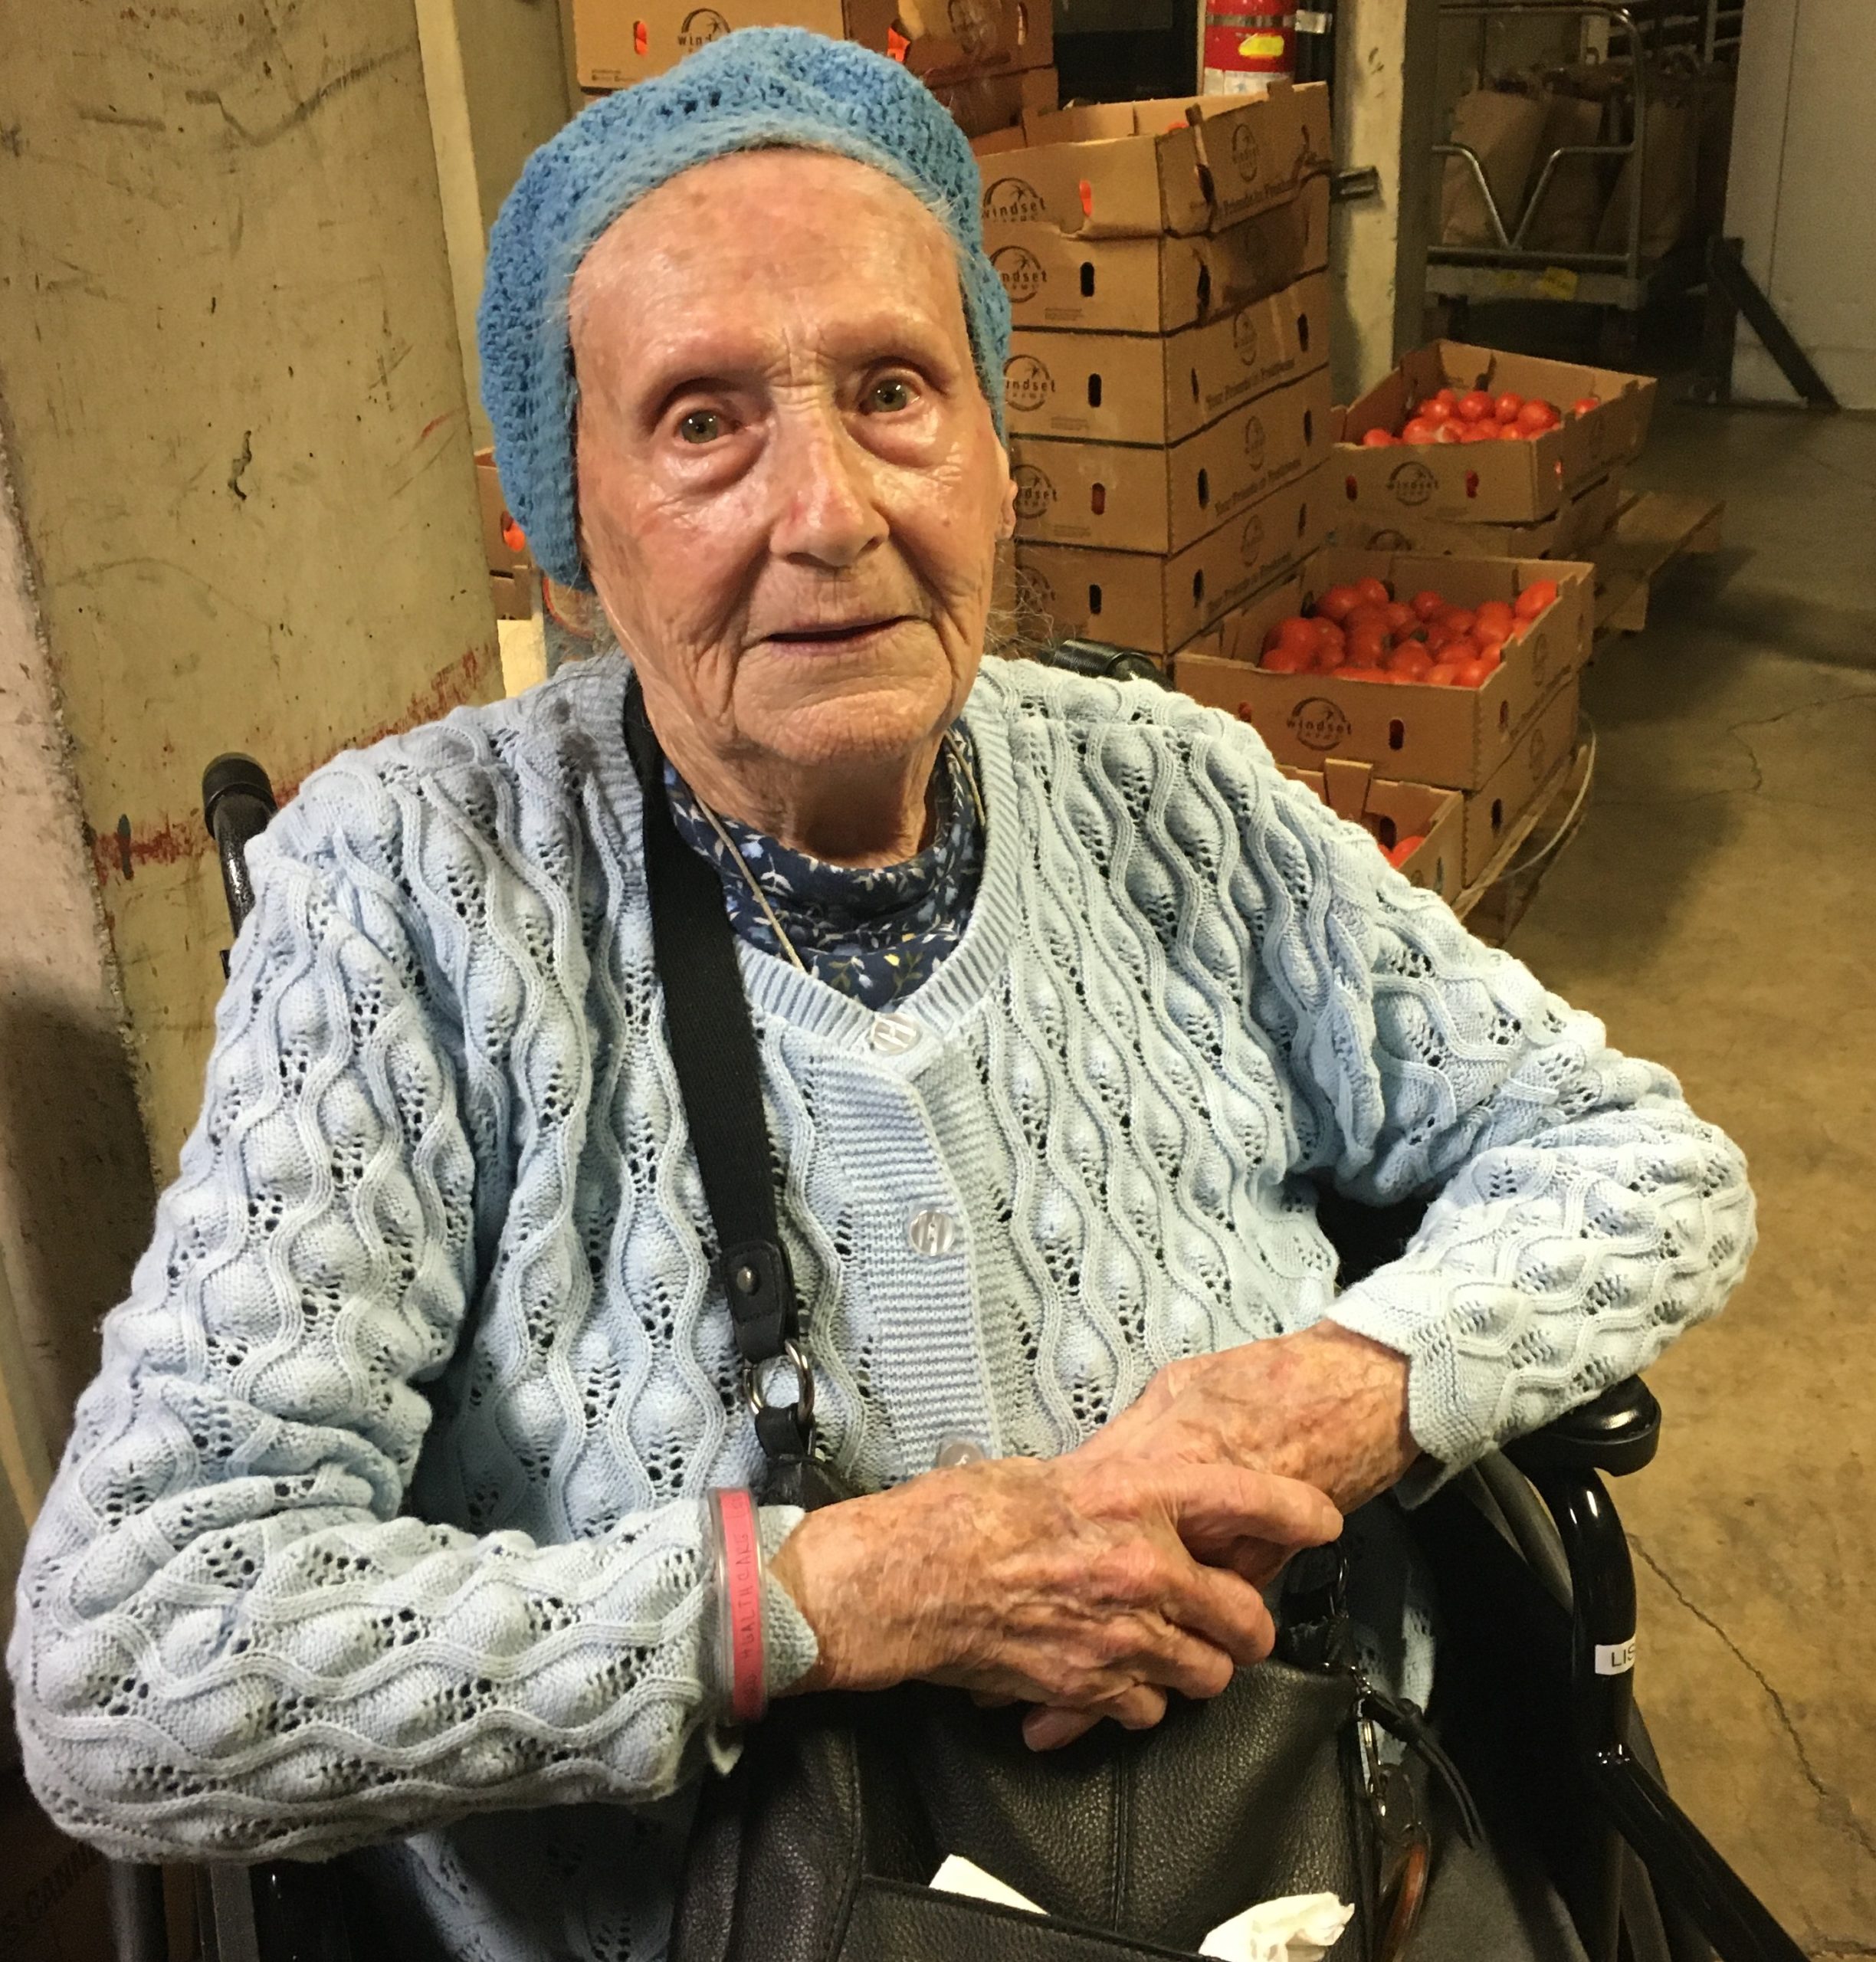 As more Bay Area seniors face hunger, California's Master Plan for Aging  could help - Oakland North